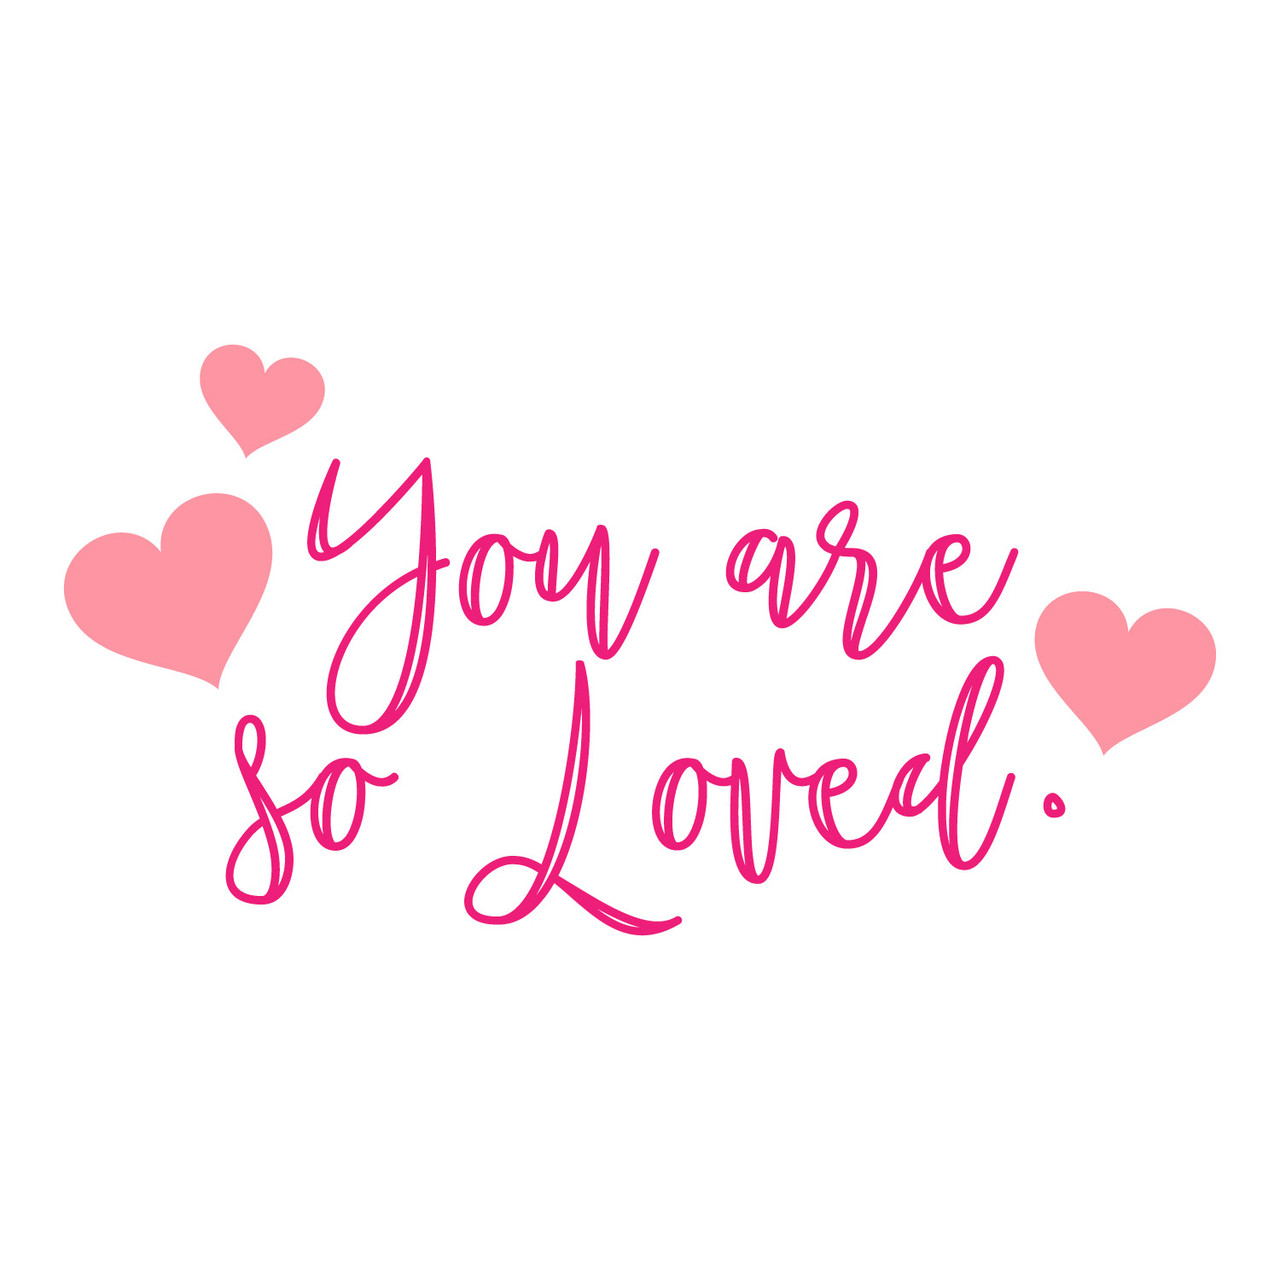 Download You Are So Loved Svg V2 Svg Eps Png Dxf Cut Files For Cricut And Silhouette Cameo By Savanasdesign